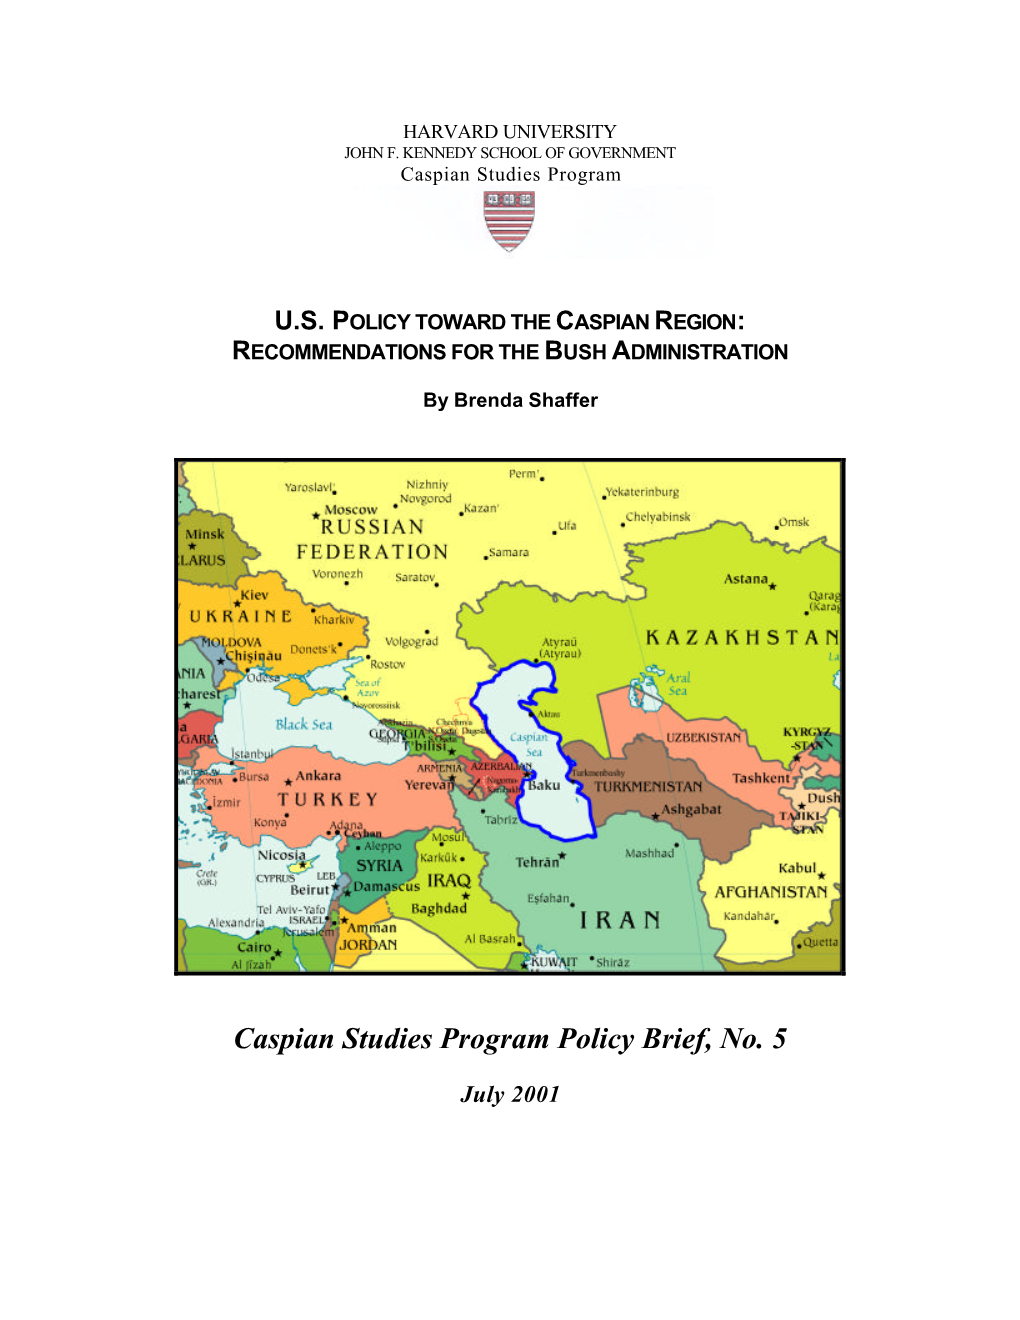 U.S. Policy Toward the Caspian Region: Recommendations for the Bush Administration